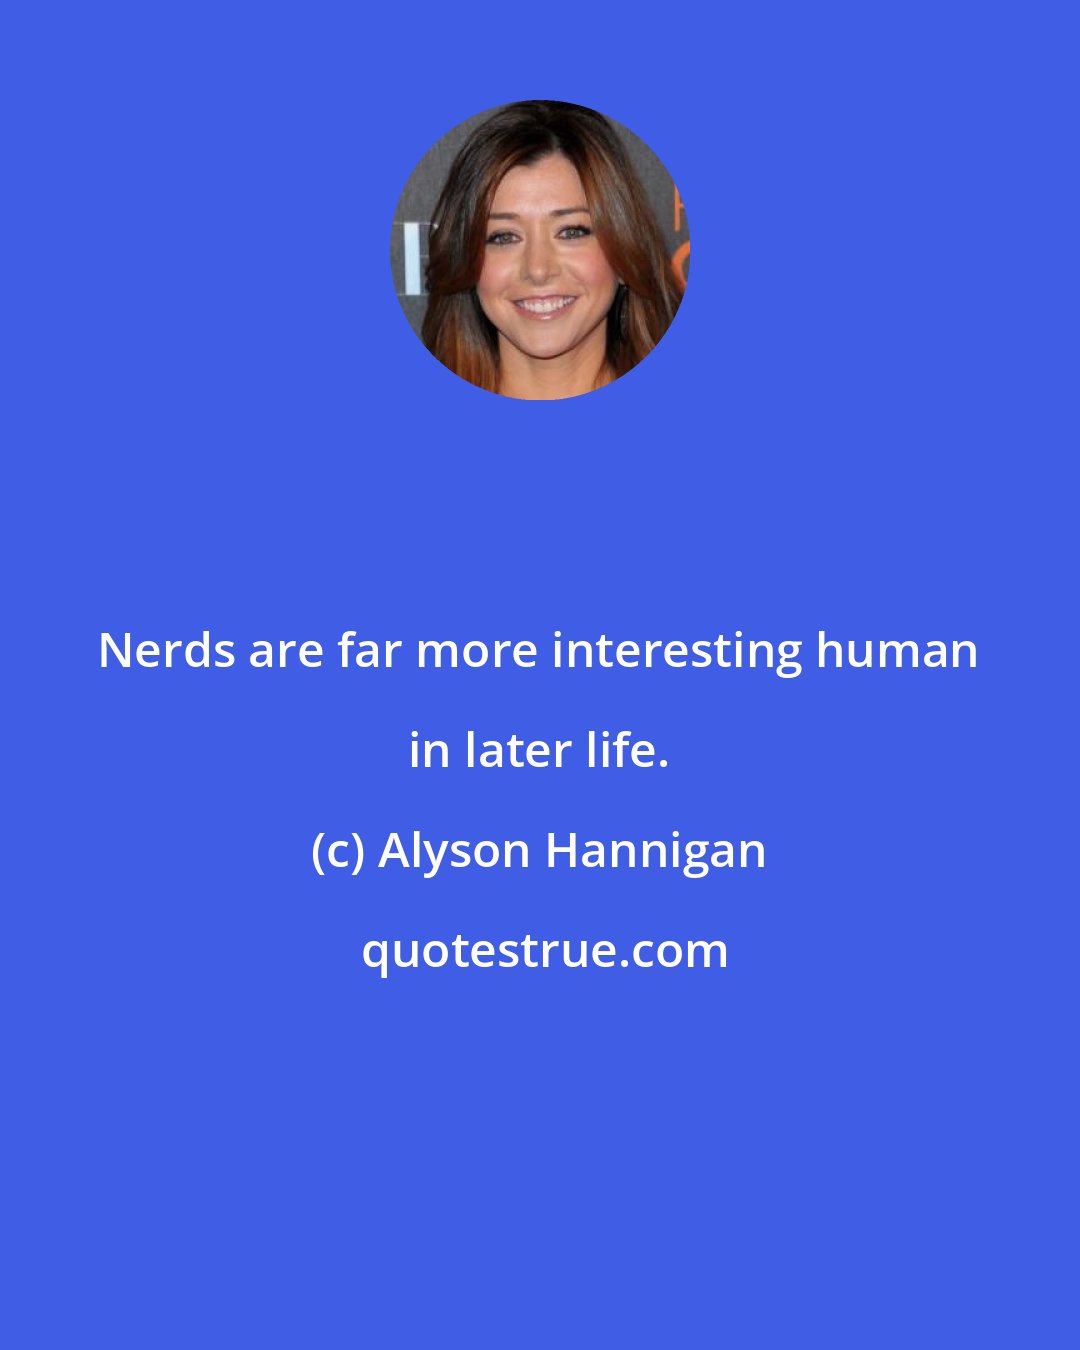 Alyson Hannigan: Nerds are far more interesting human in later life.